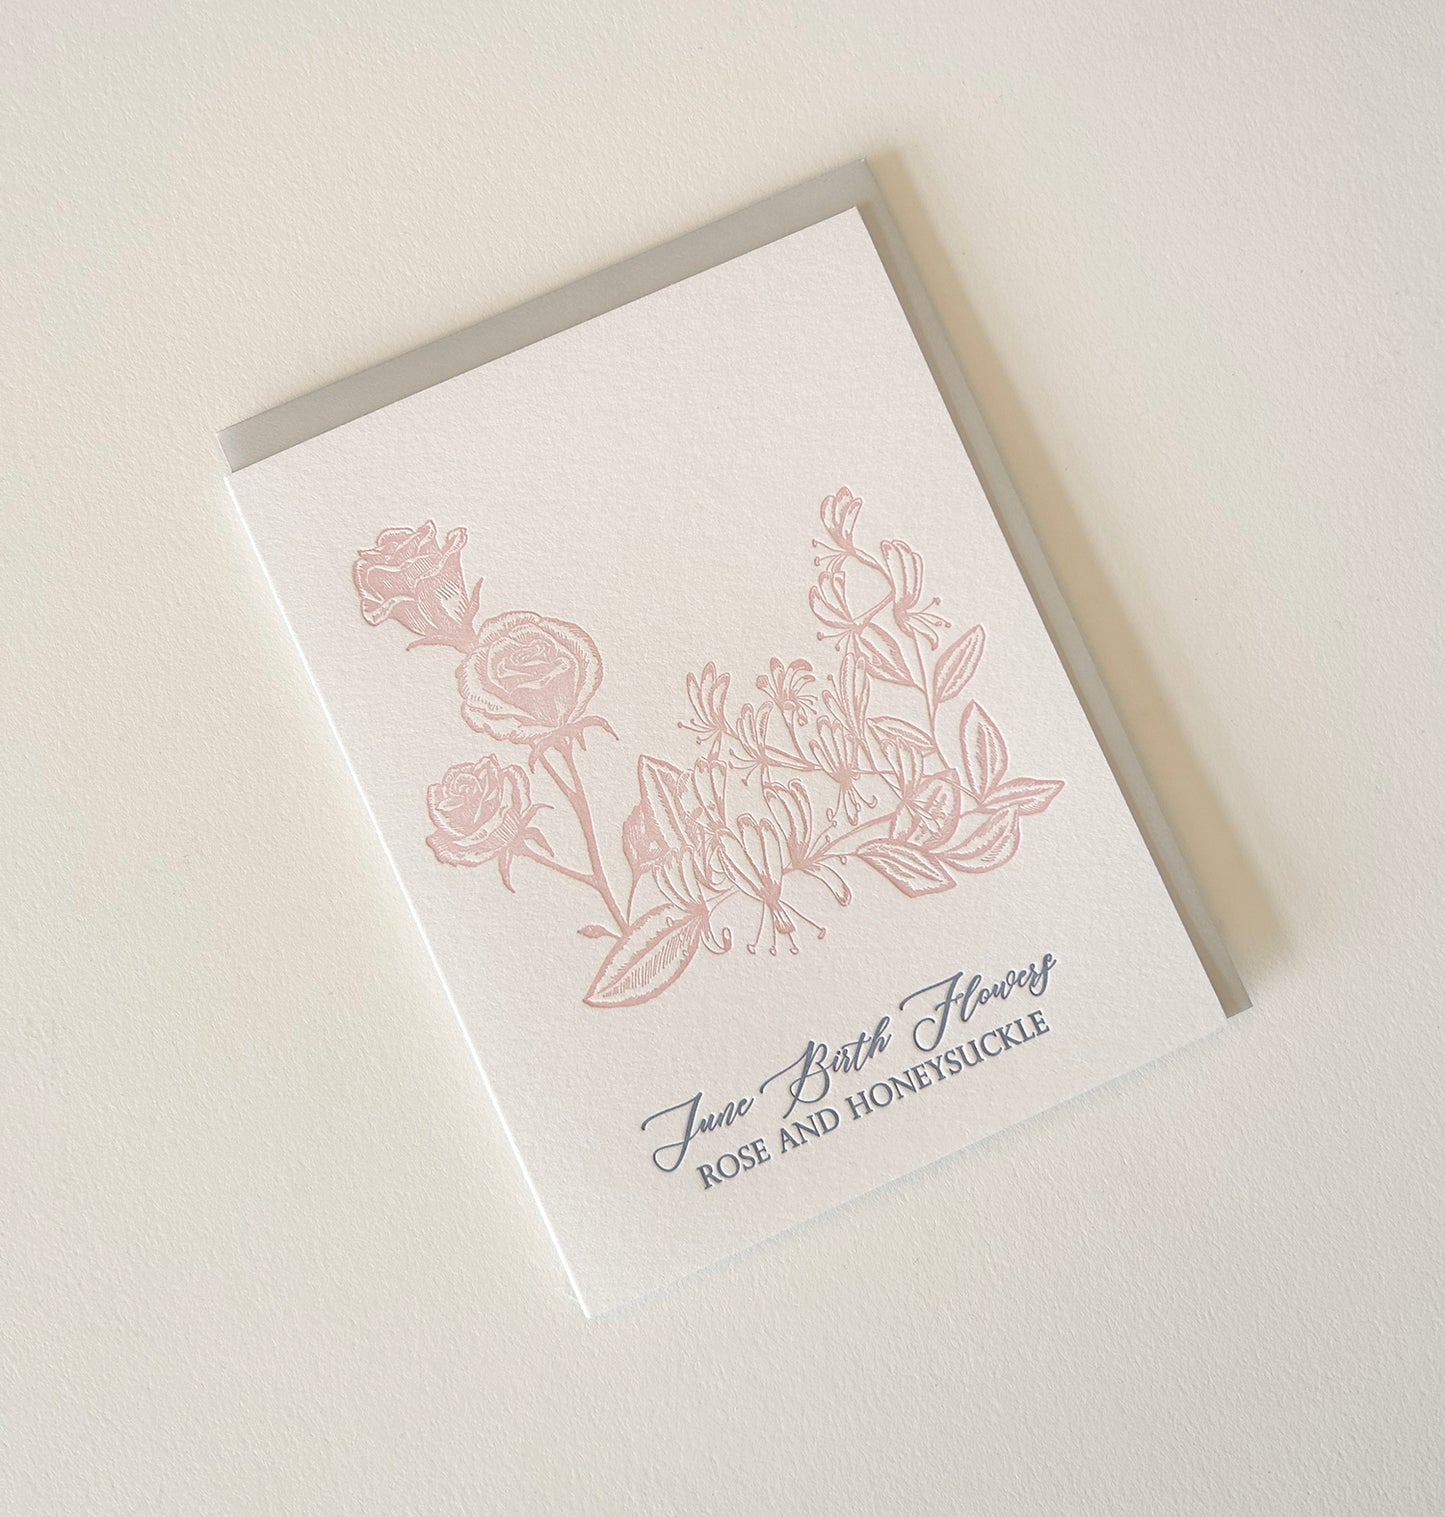 Letterpress birthday card with florals that says "June birth flowers rose and honeysuckle" by Rust Belt Love